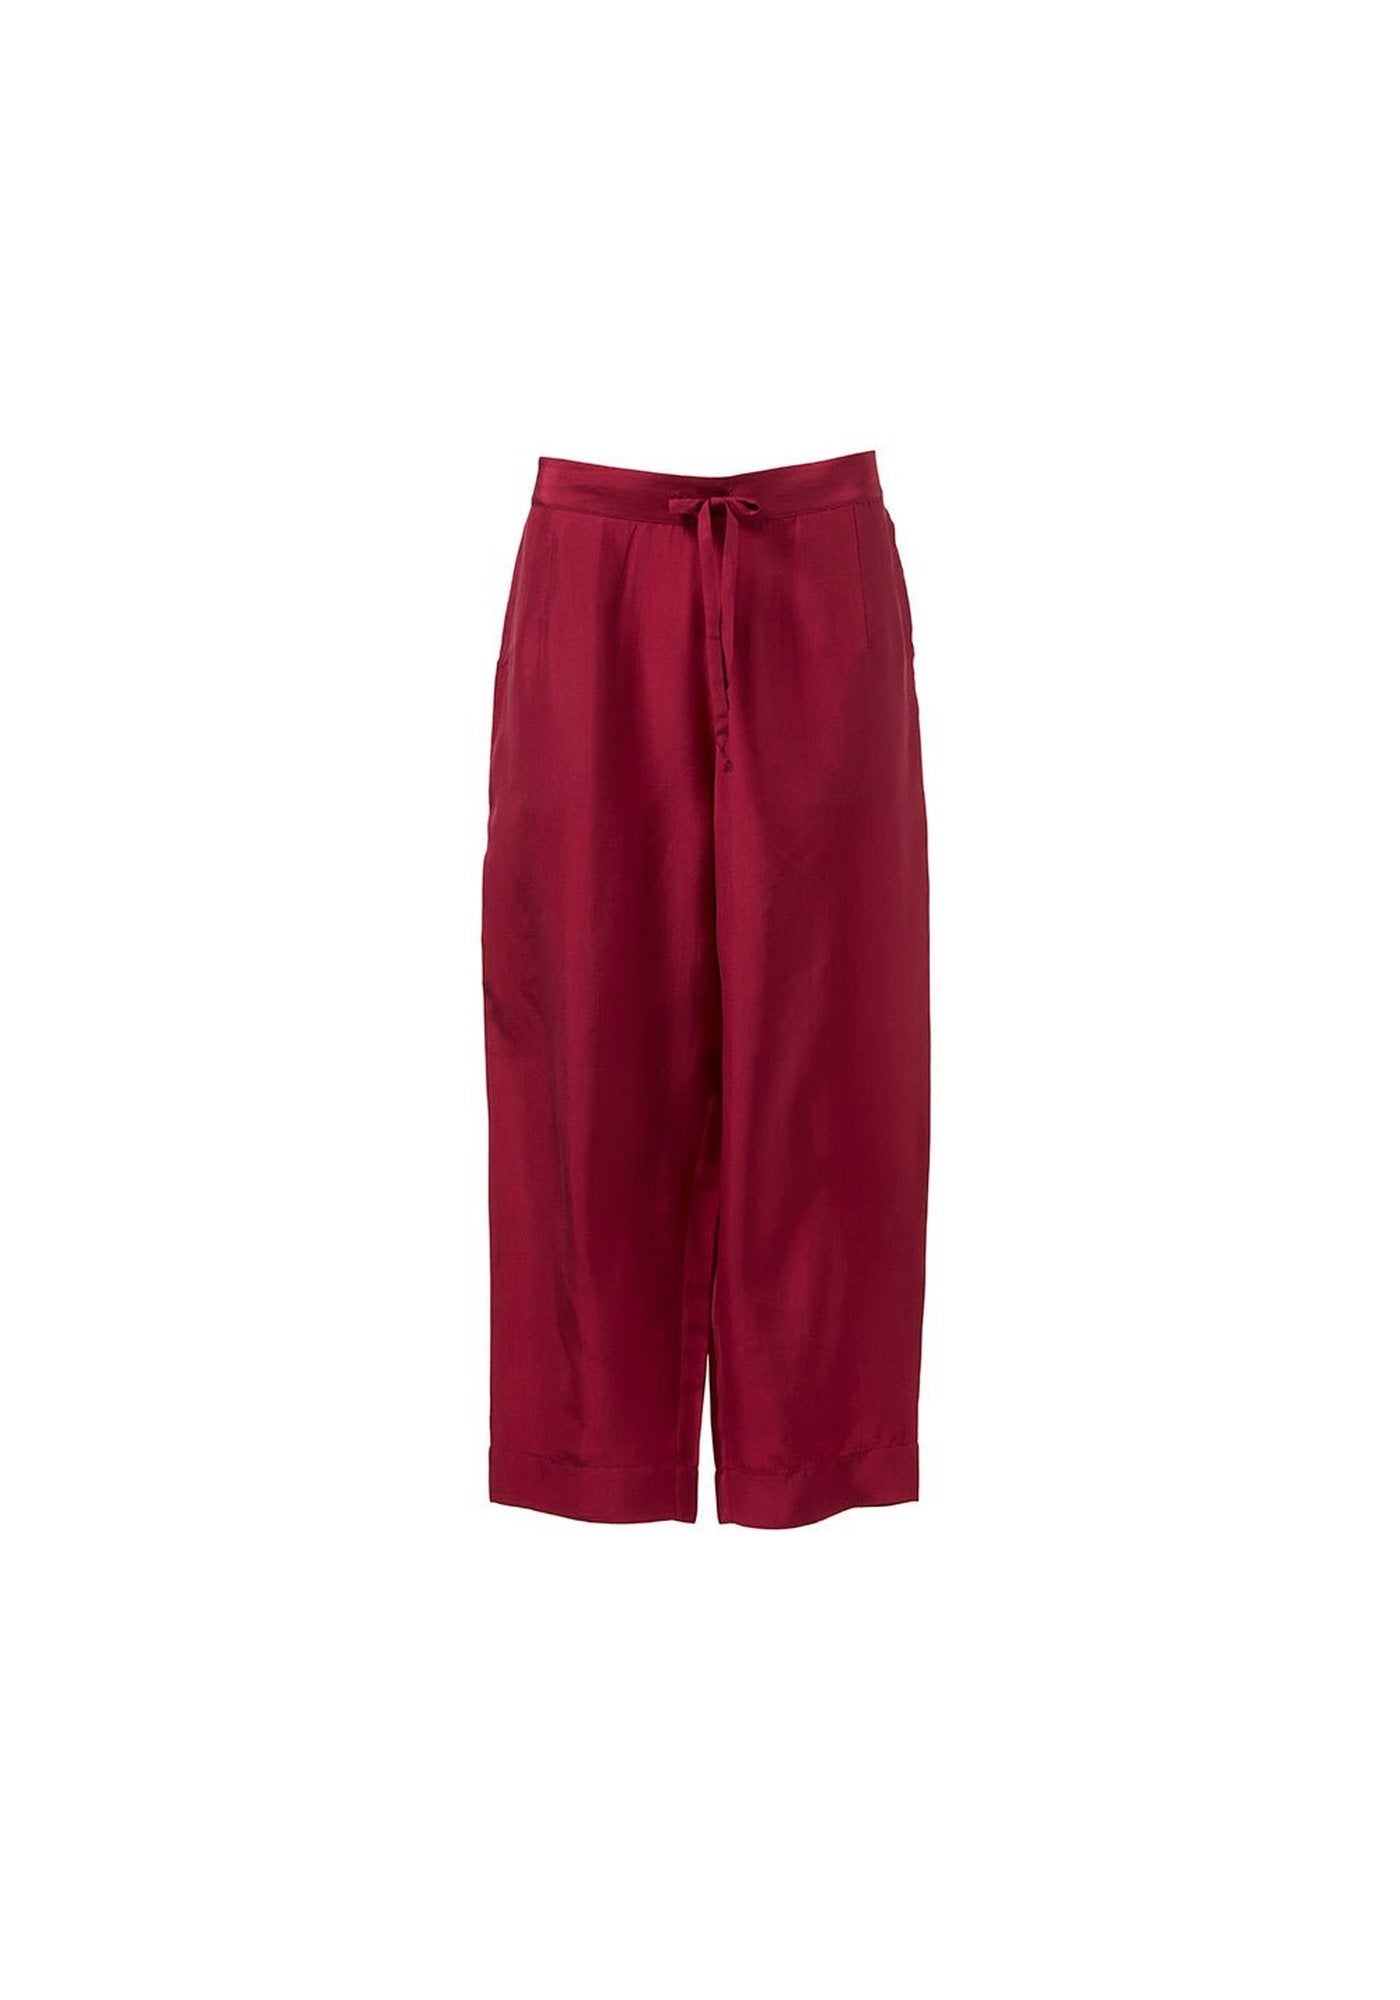 Trousers Still Beet Red - Traces of Me